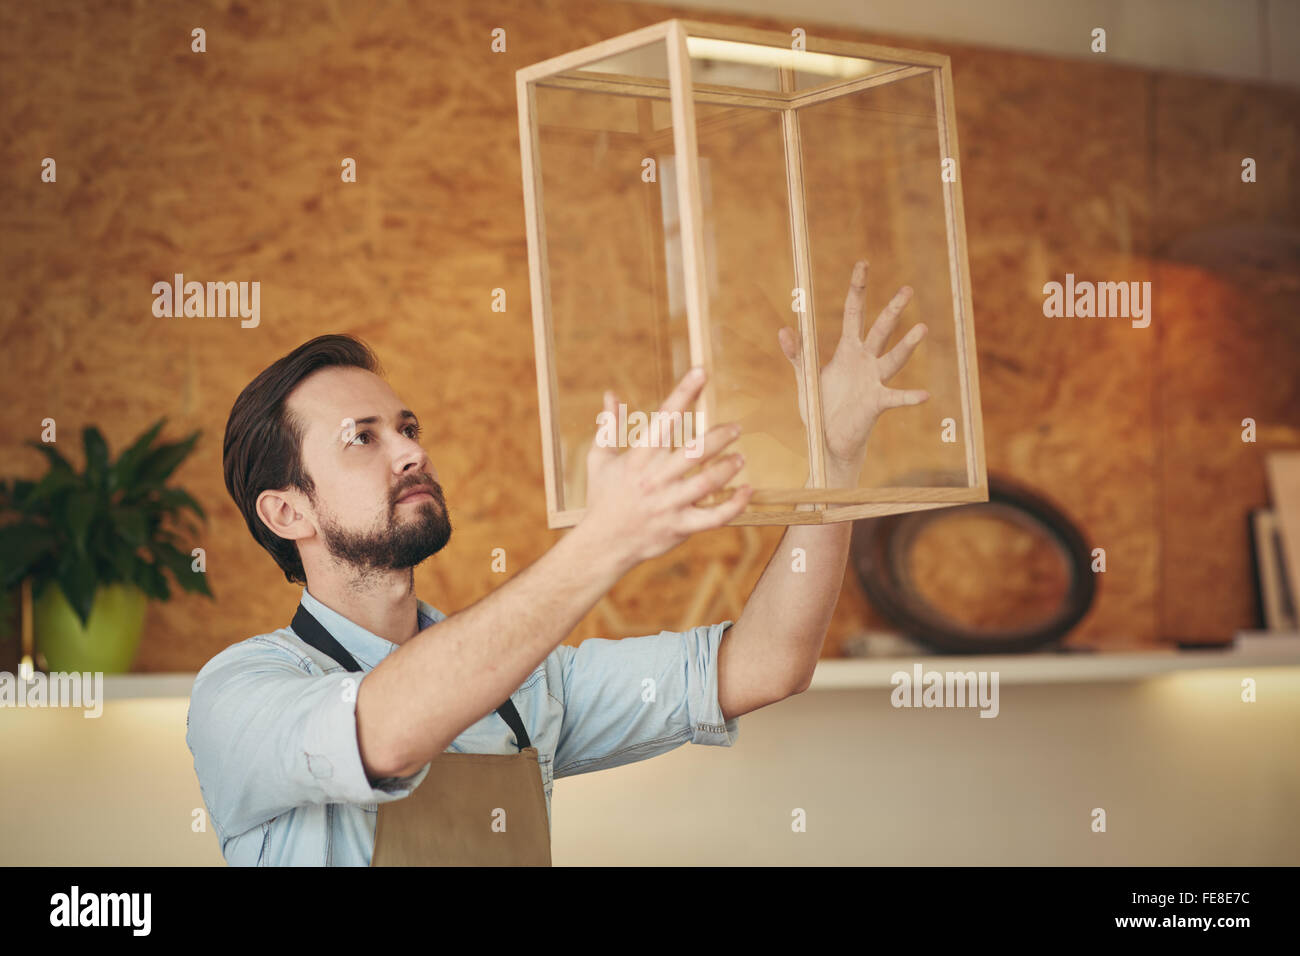 Craftsman holding up a glass and wood display case that he designed and manufactured with skill Stock Photo